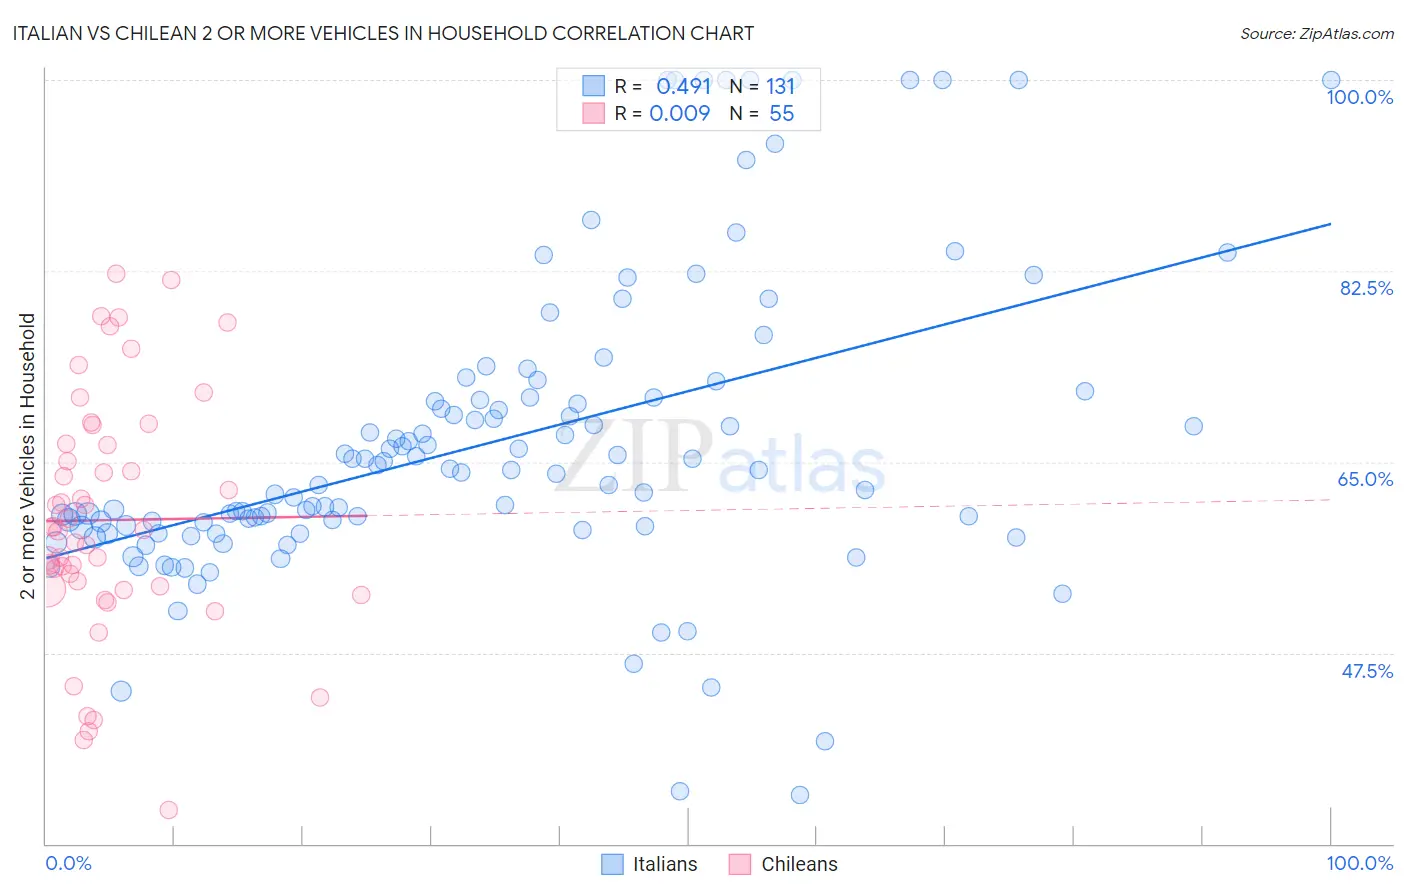 Italian vs Chilean 2 or more Vehicles in Household